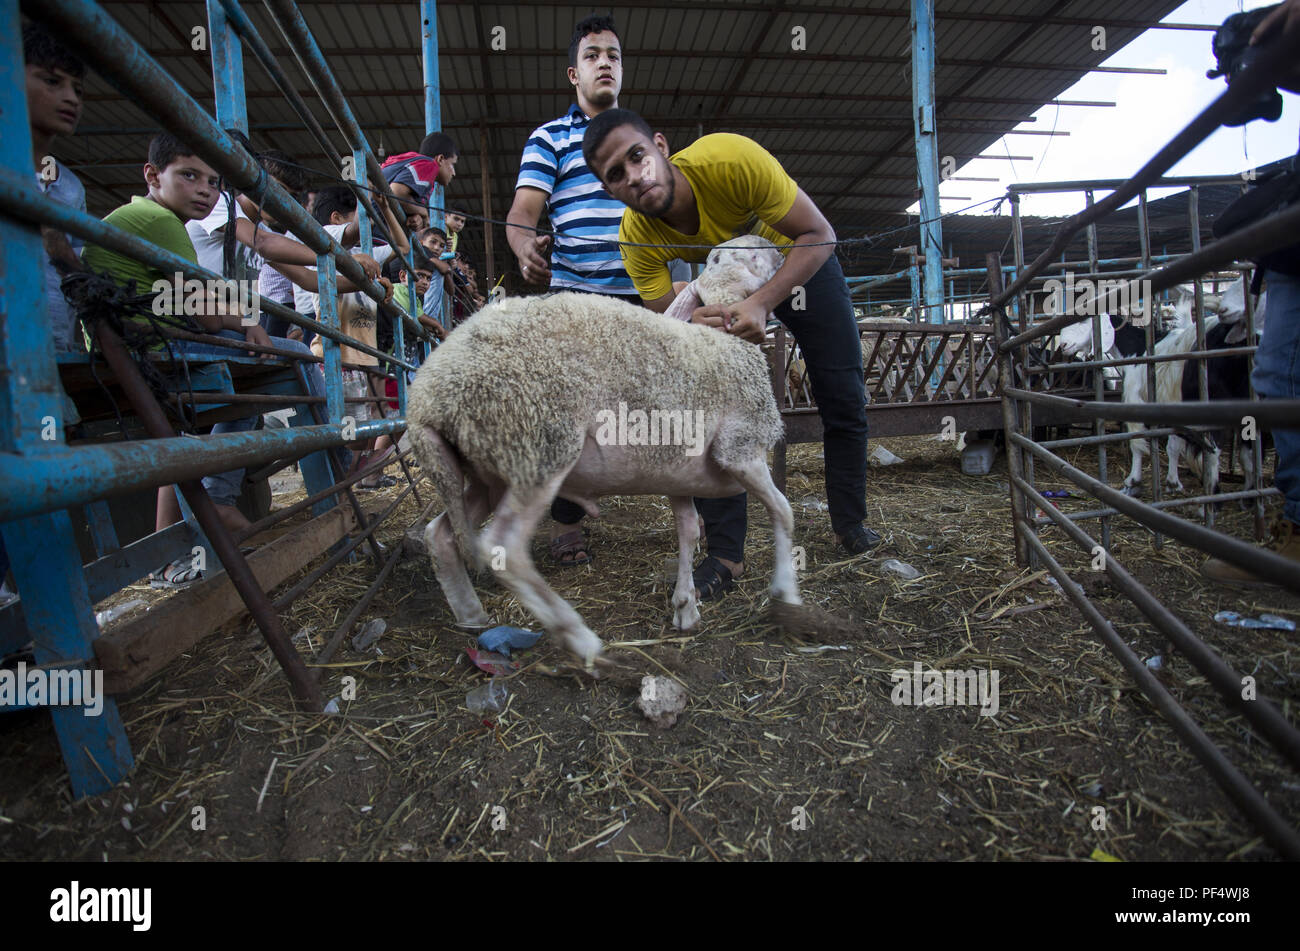 Gaza City, The Gaza Strip, Gaza. 18th Aug, 2018. A farmer seen with a sheep.Palestinians gather in a cattle shop to purchase cattles to be sacrificed. before Eid al-Adha in the east of Jabalya refugee camp. Eid al-Adha (Festival of Sacrifice) is celebrated throughout the Islamic world as the commemoration of Abraham's will to sacrifice his son for God, cows, camels, goats and sheep are traditionally slaughtered on the Holy Day. Credit: Mahmoud Issa/SOPA Images/ZUMA Wire/Alamy Live News Stock Photo